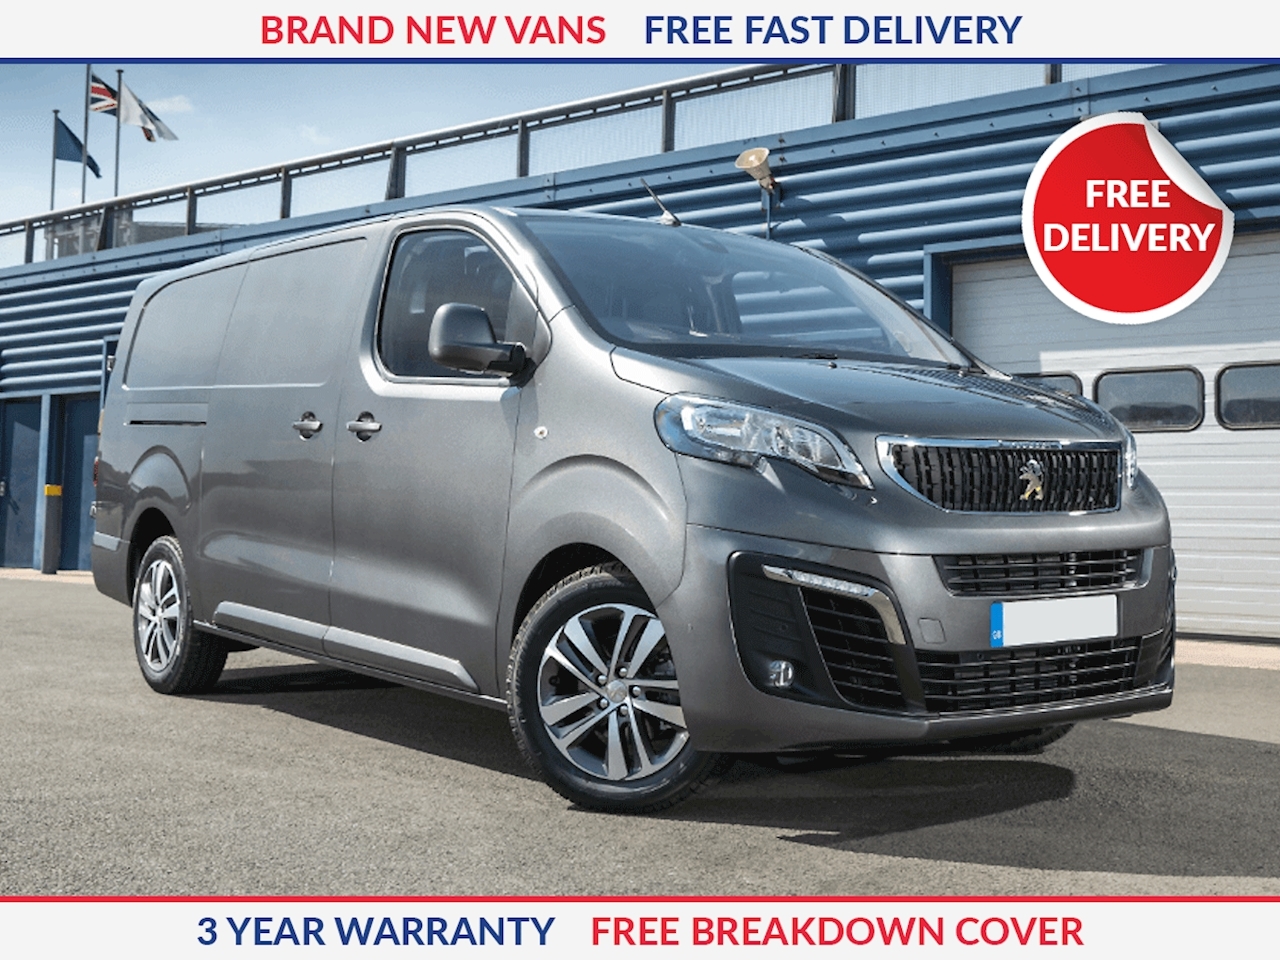 Rent a Peugeot Expert, Our Vehicles